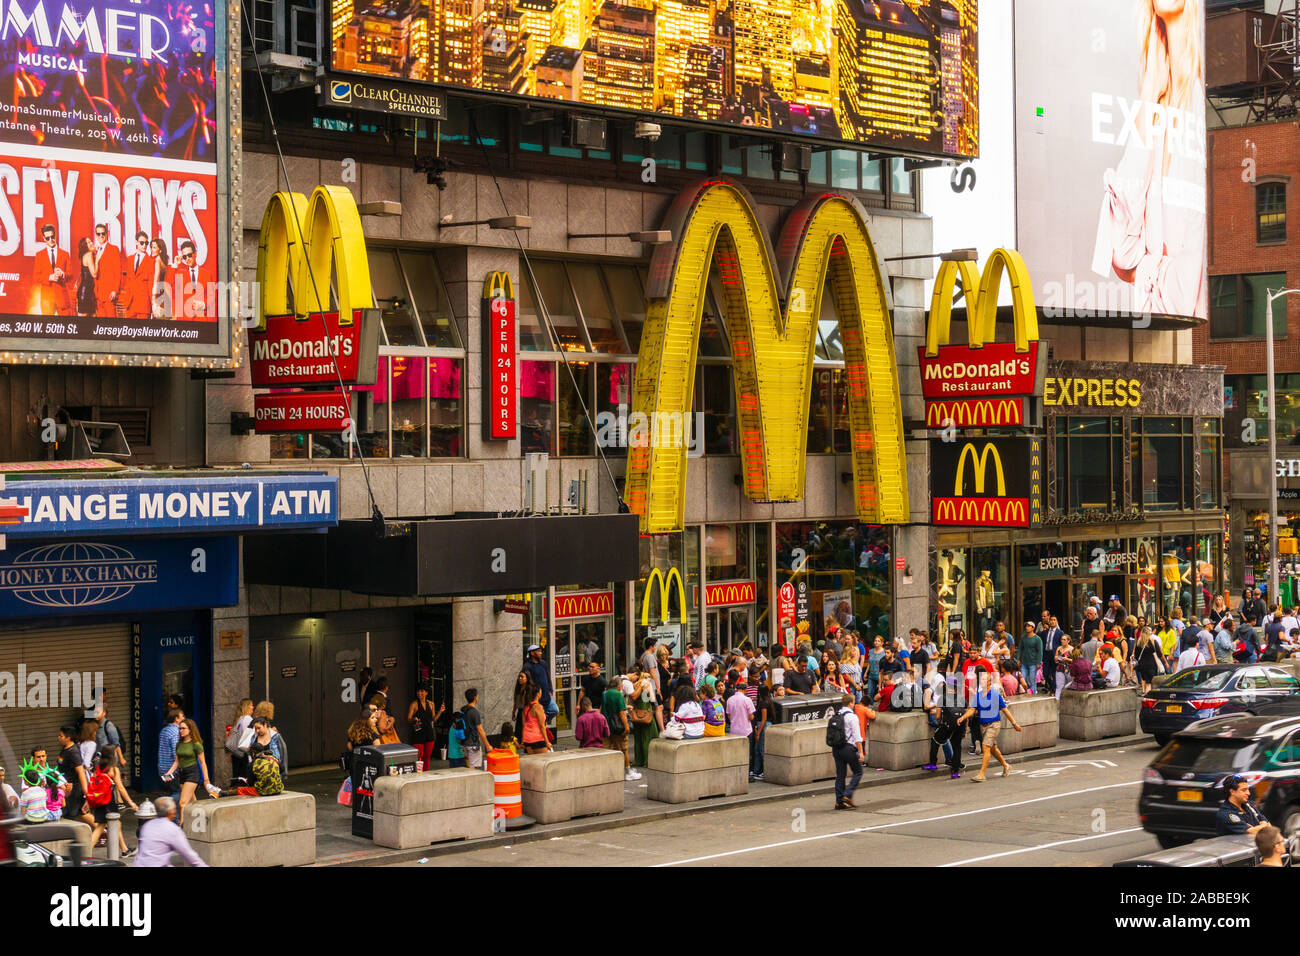 New York, USA - aug 20, 2018: Exterior of McDonald's Restaurant in Times Square, New York. Stock Photo